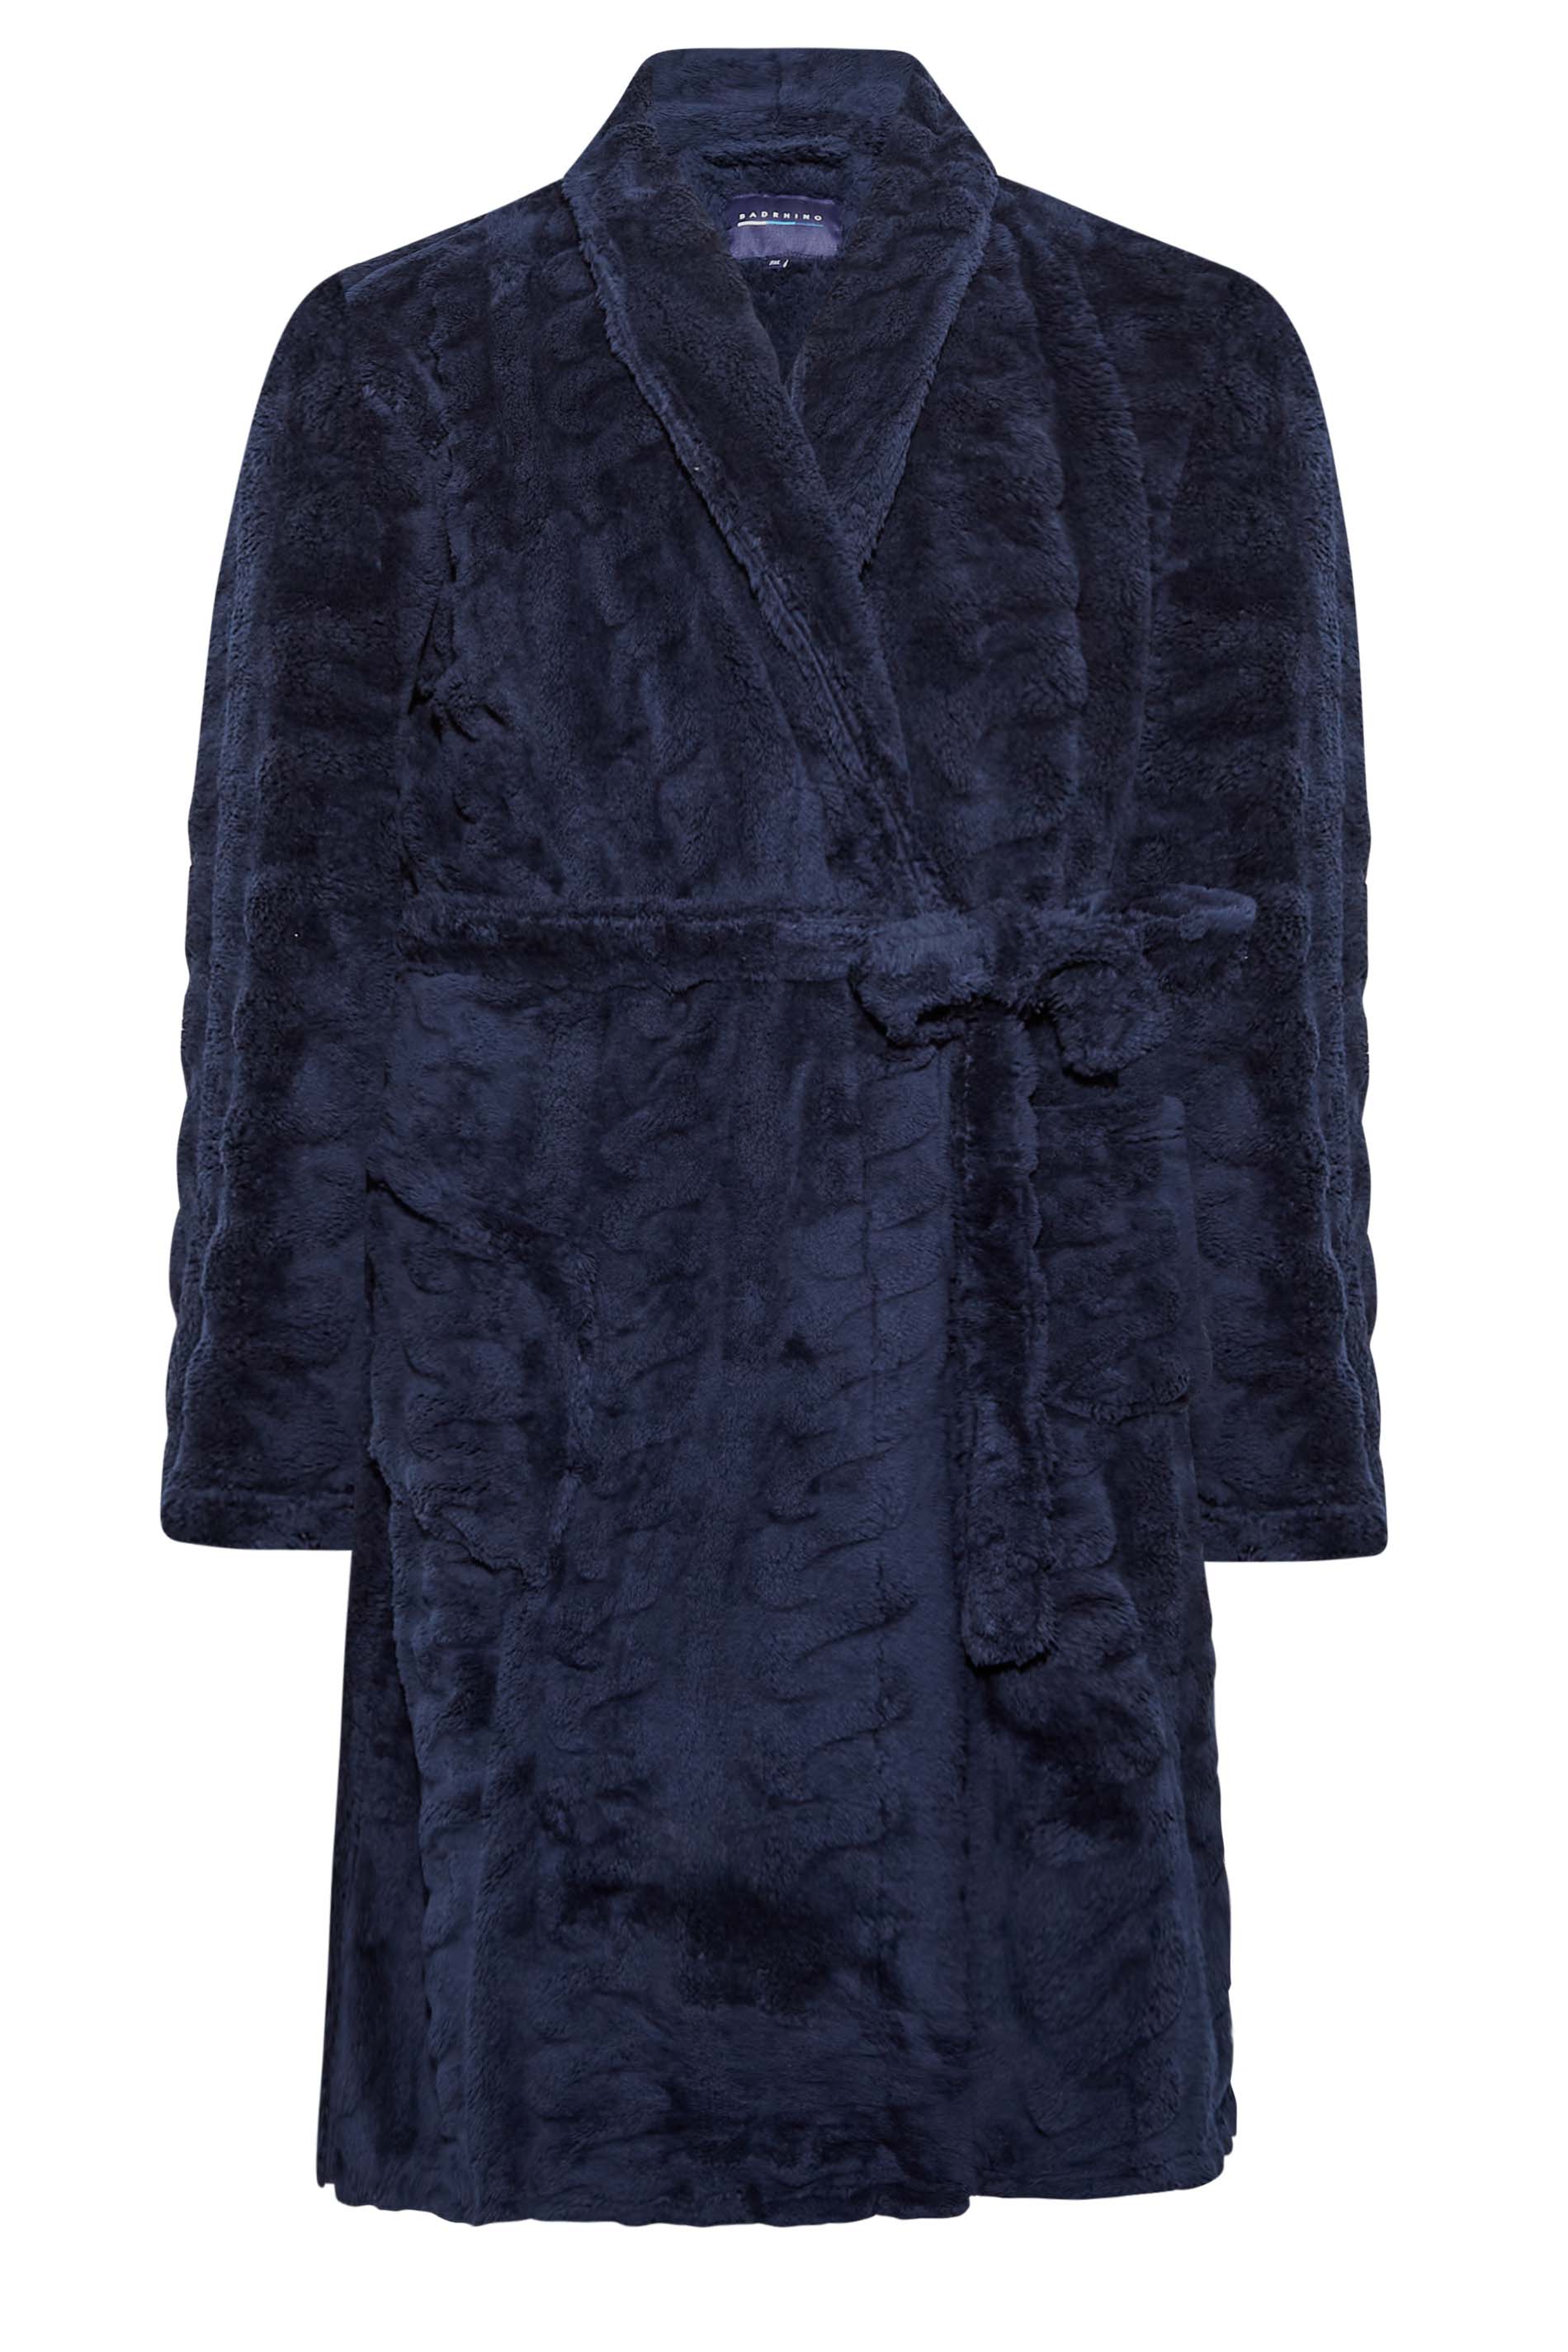 BadRhino Big & Tall Navy Blue Cable Dressing Gown | BadRhino 3